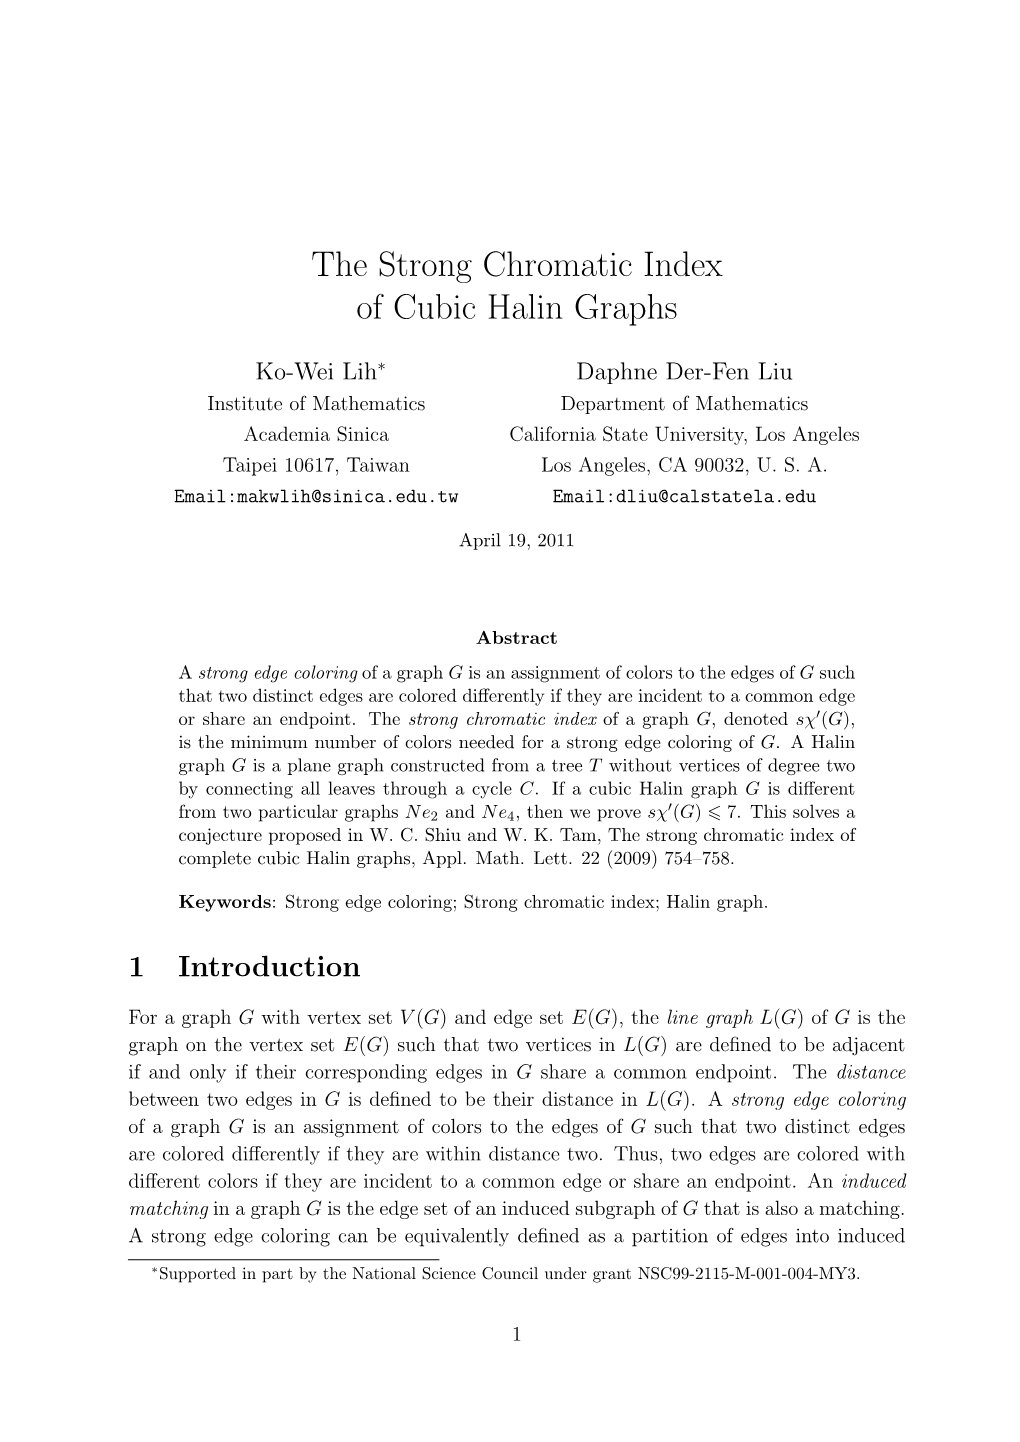 The Strong Chromatic Index of Cubic Halin Graphs